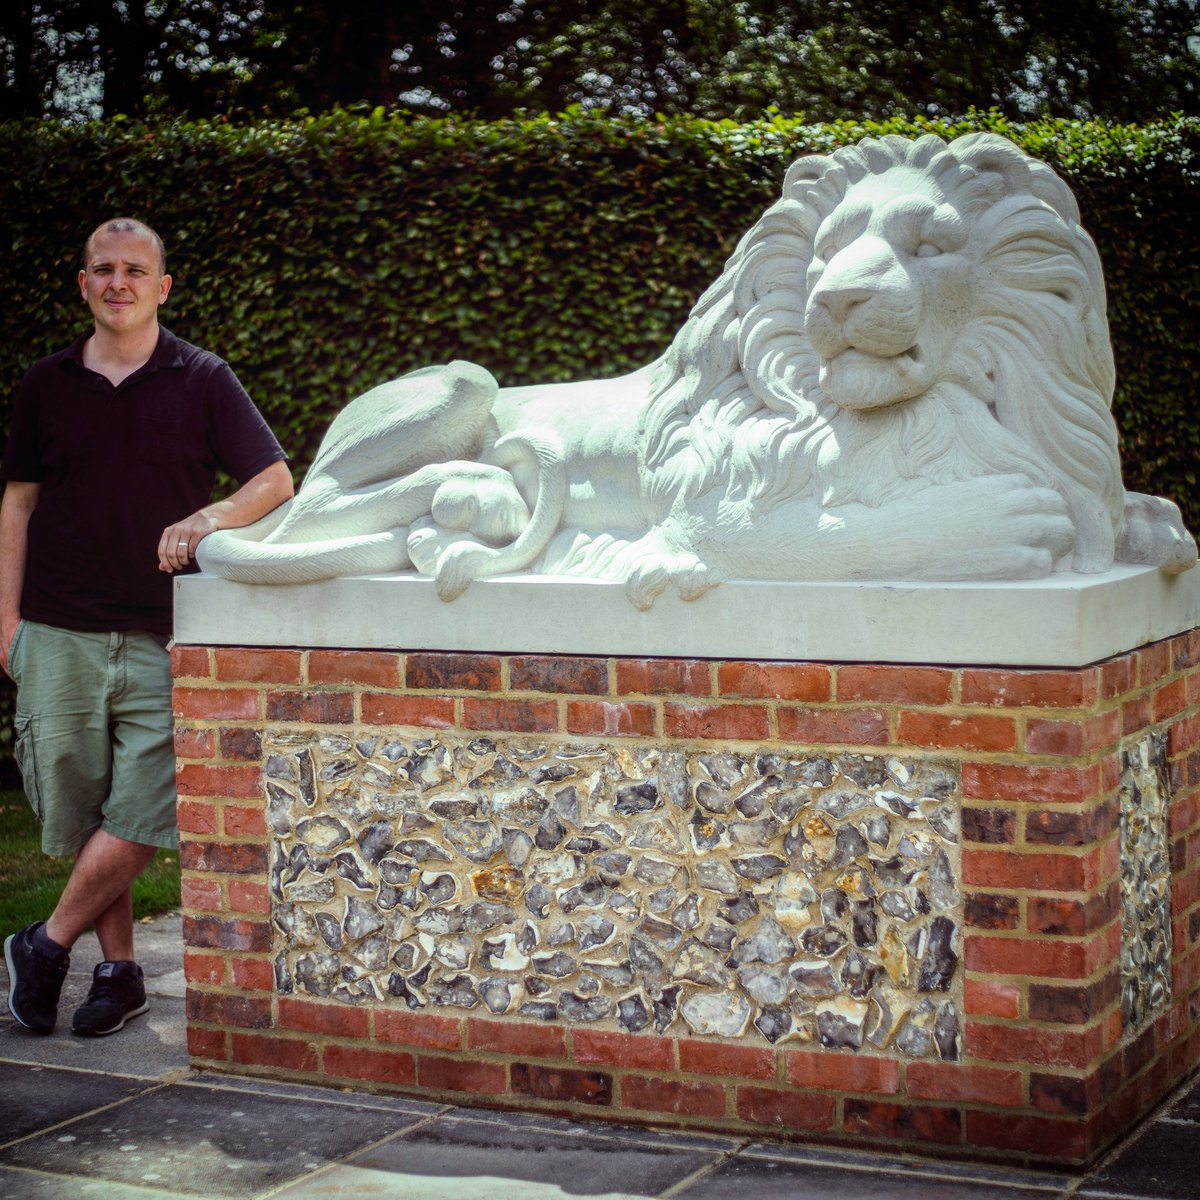 The finished lion. Comfortable & proud on his plinth at last. It's been a great adventure. #lionsculpture #animalsculpture #gardensculpture